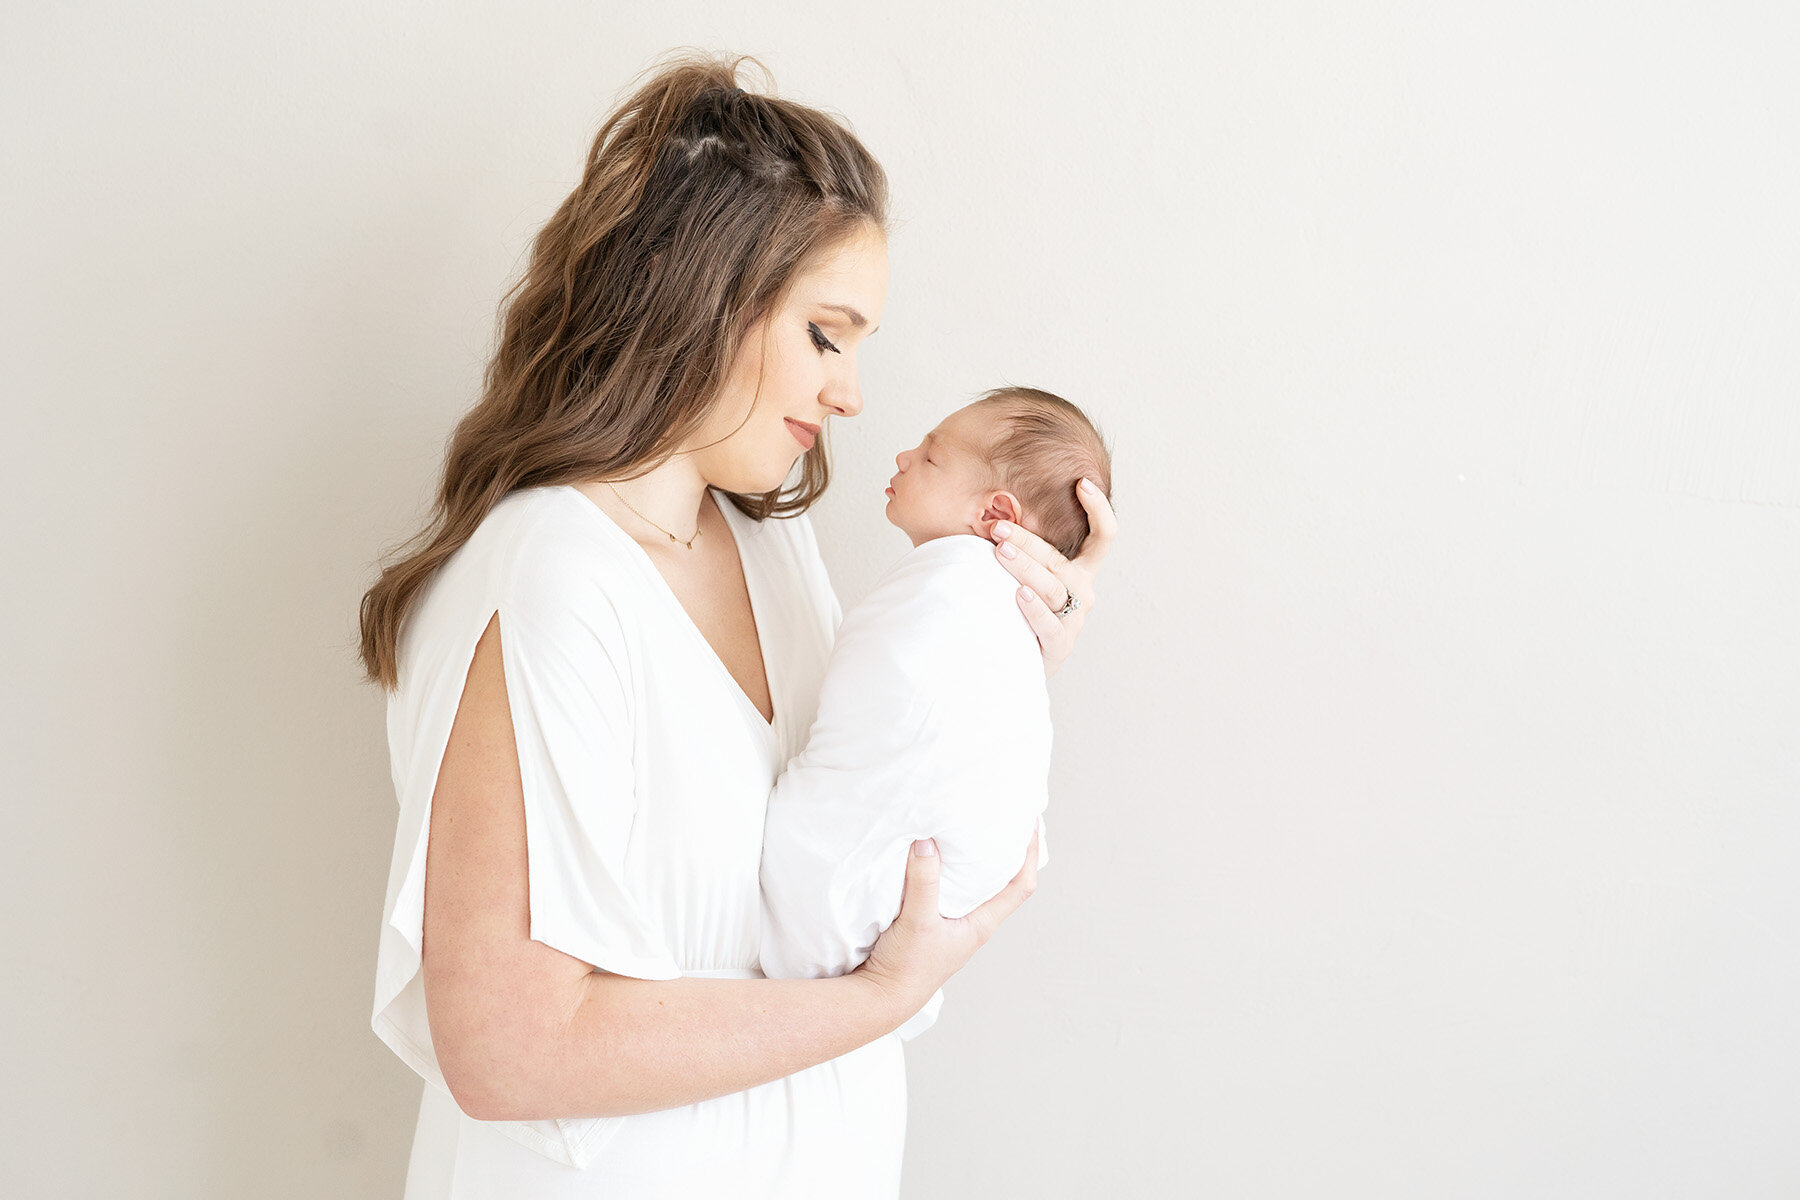 Top Newborn Photographer Southern IN Louisville KY | Julie Brock Photography | Baby first year photographer | photographer with clothing for moms.jpg